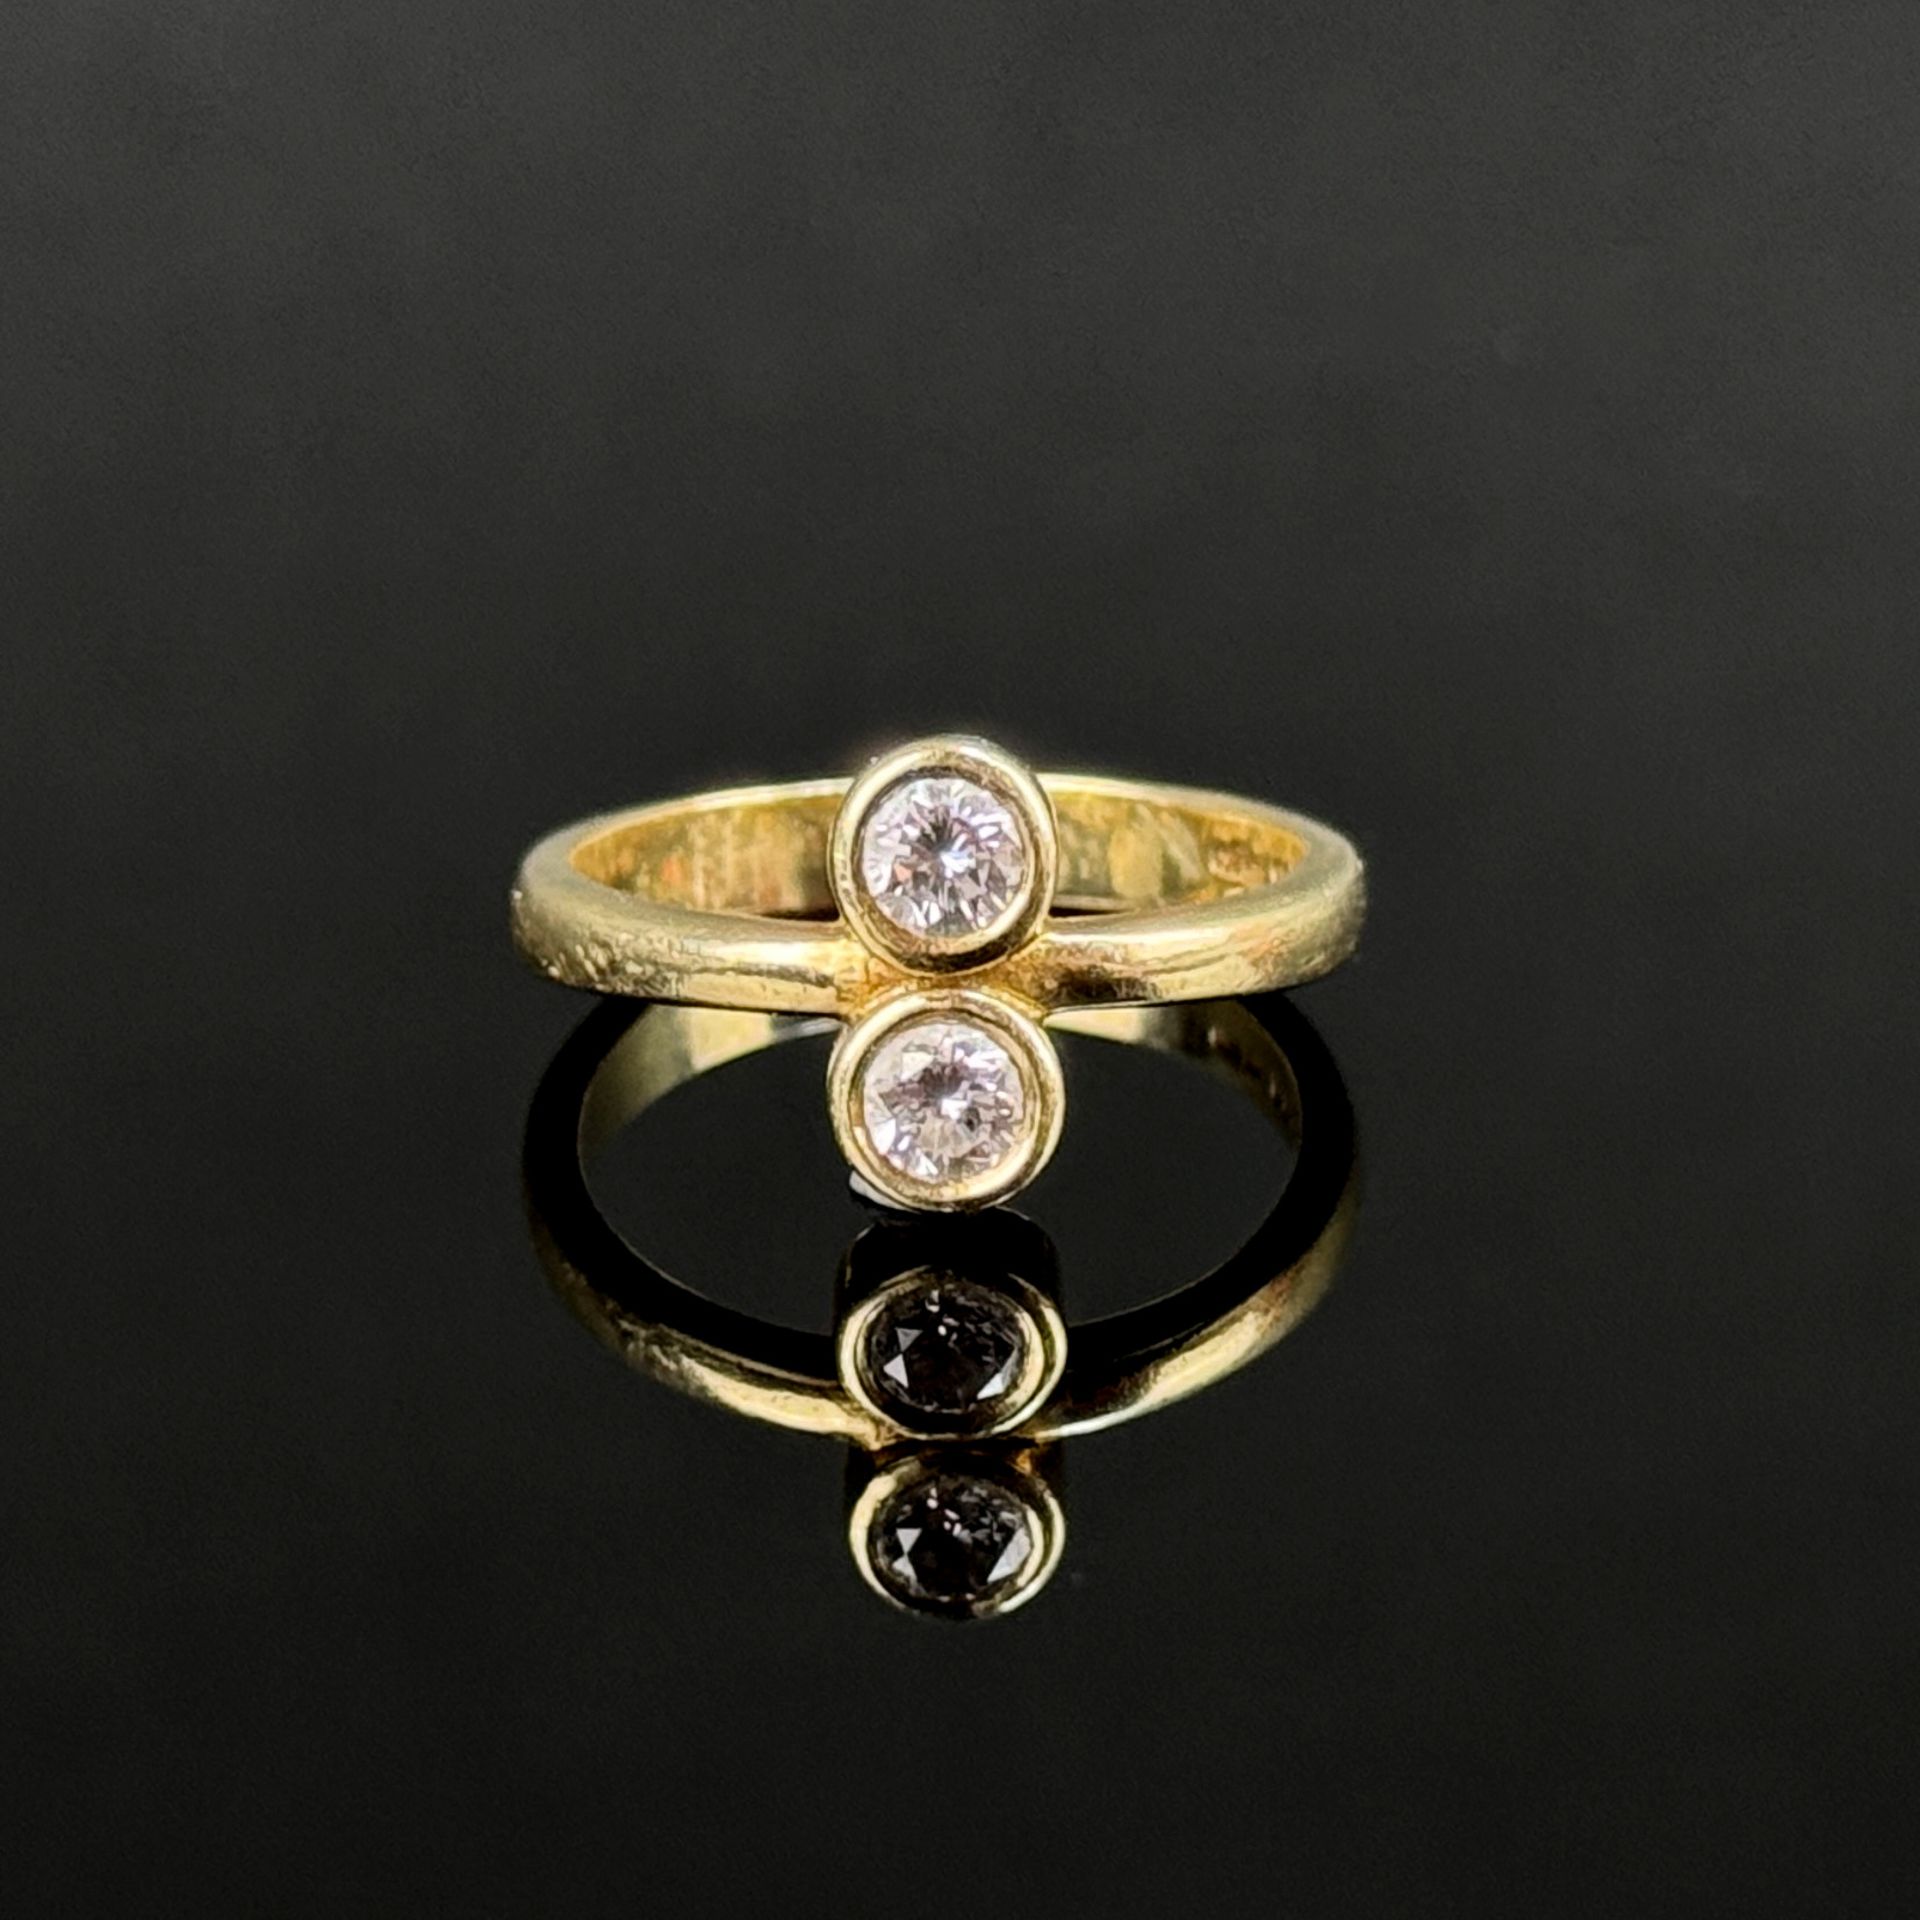 Diamond ring, 585/14K yellow gold (hallmarked), 4g, front with two round brilliant-cut diamonds, to - Image 2 of 3